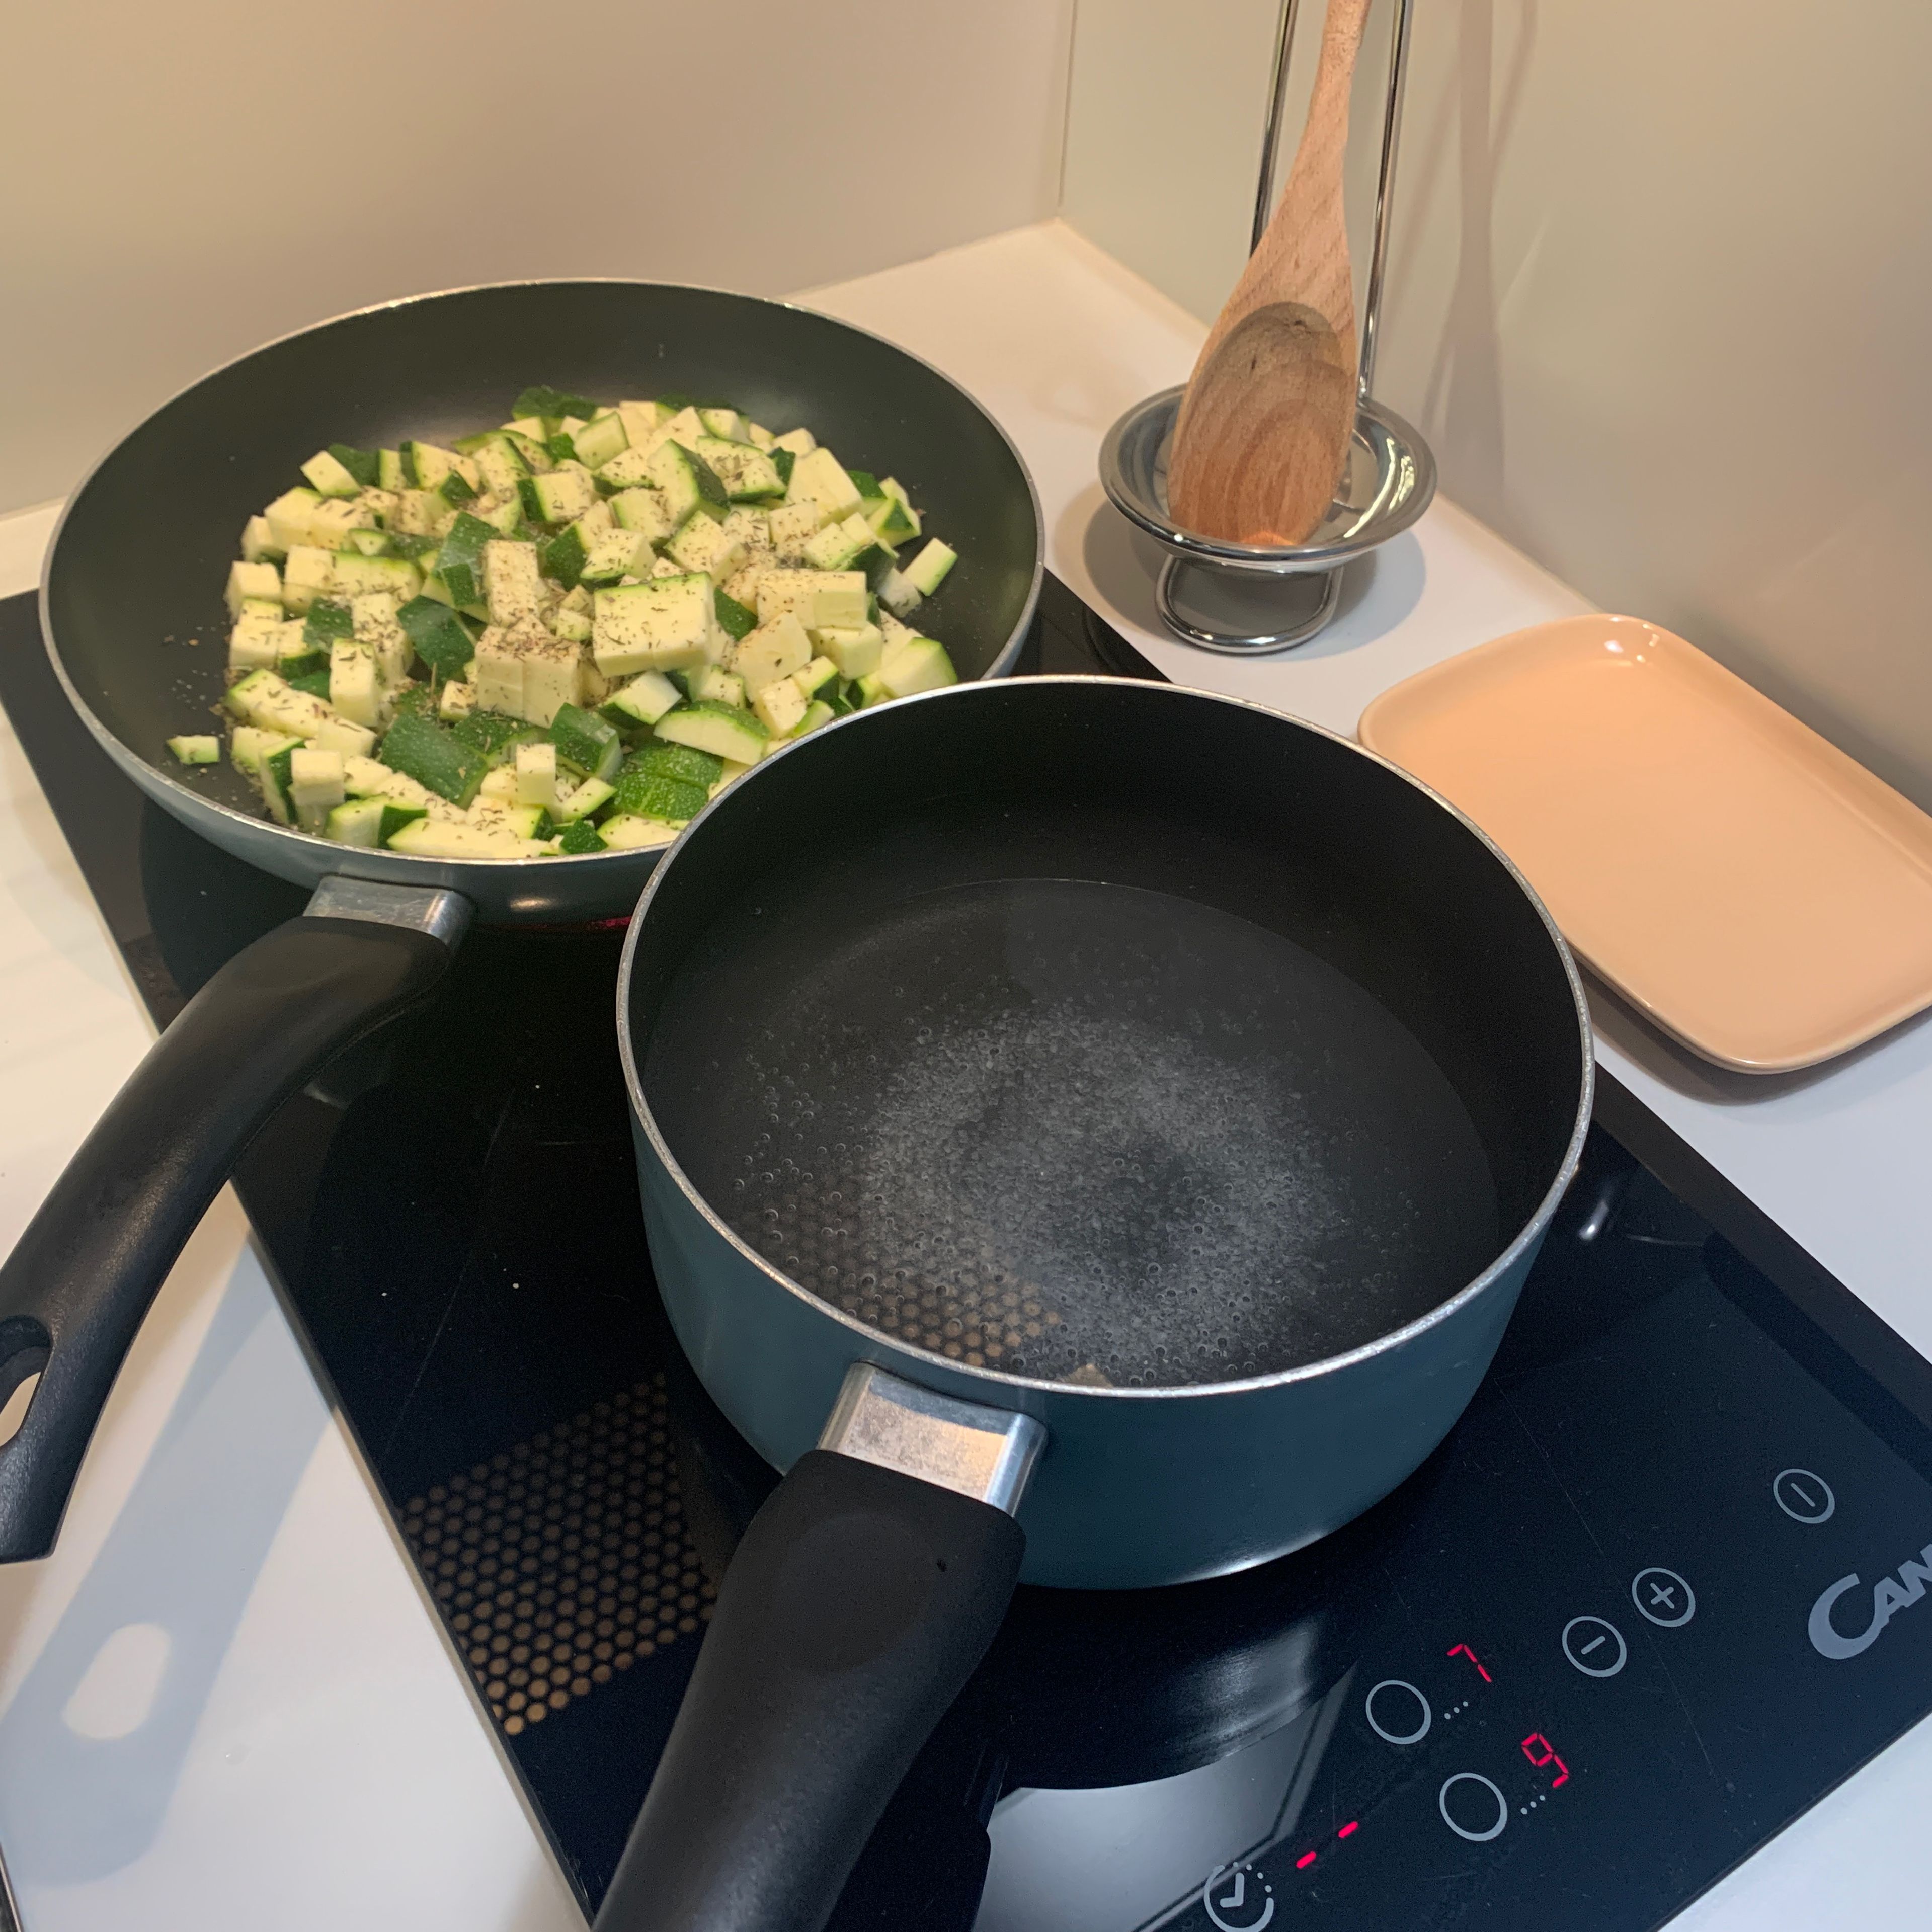 Heat some olive oil in a medium large pan together with a garlic clove. Put the zucchini in the pan and add salt, pepper and thyme. Stir often and let it cook for 15 minutes at low heat while the water starts boiling.